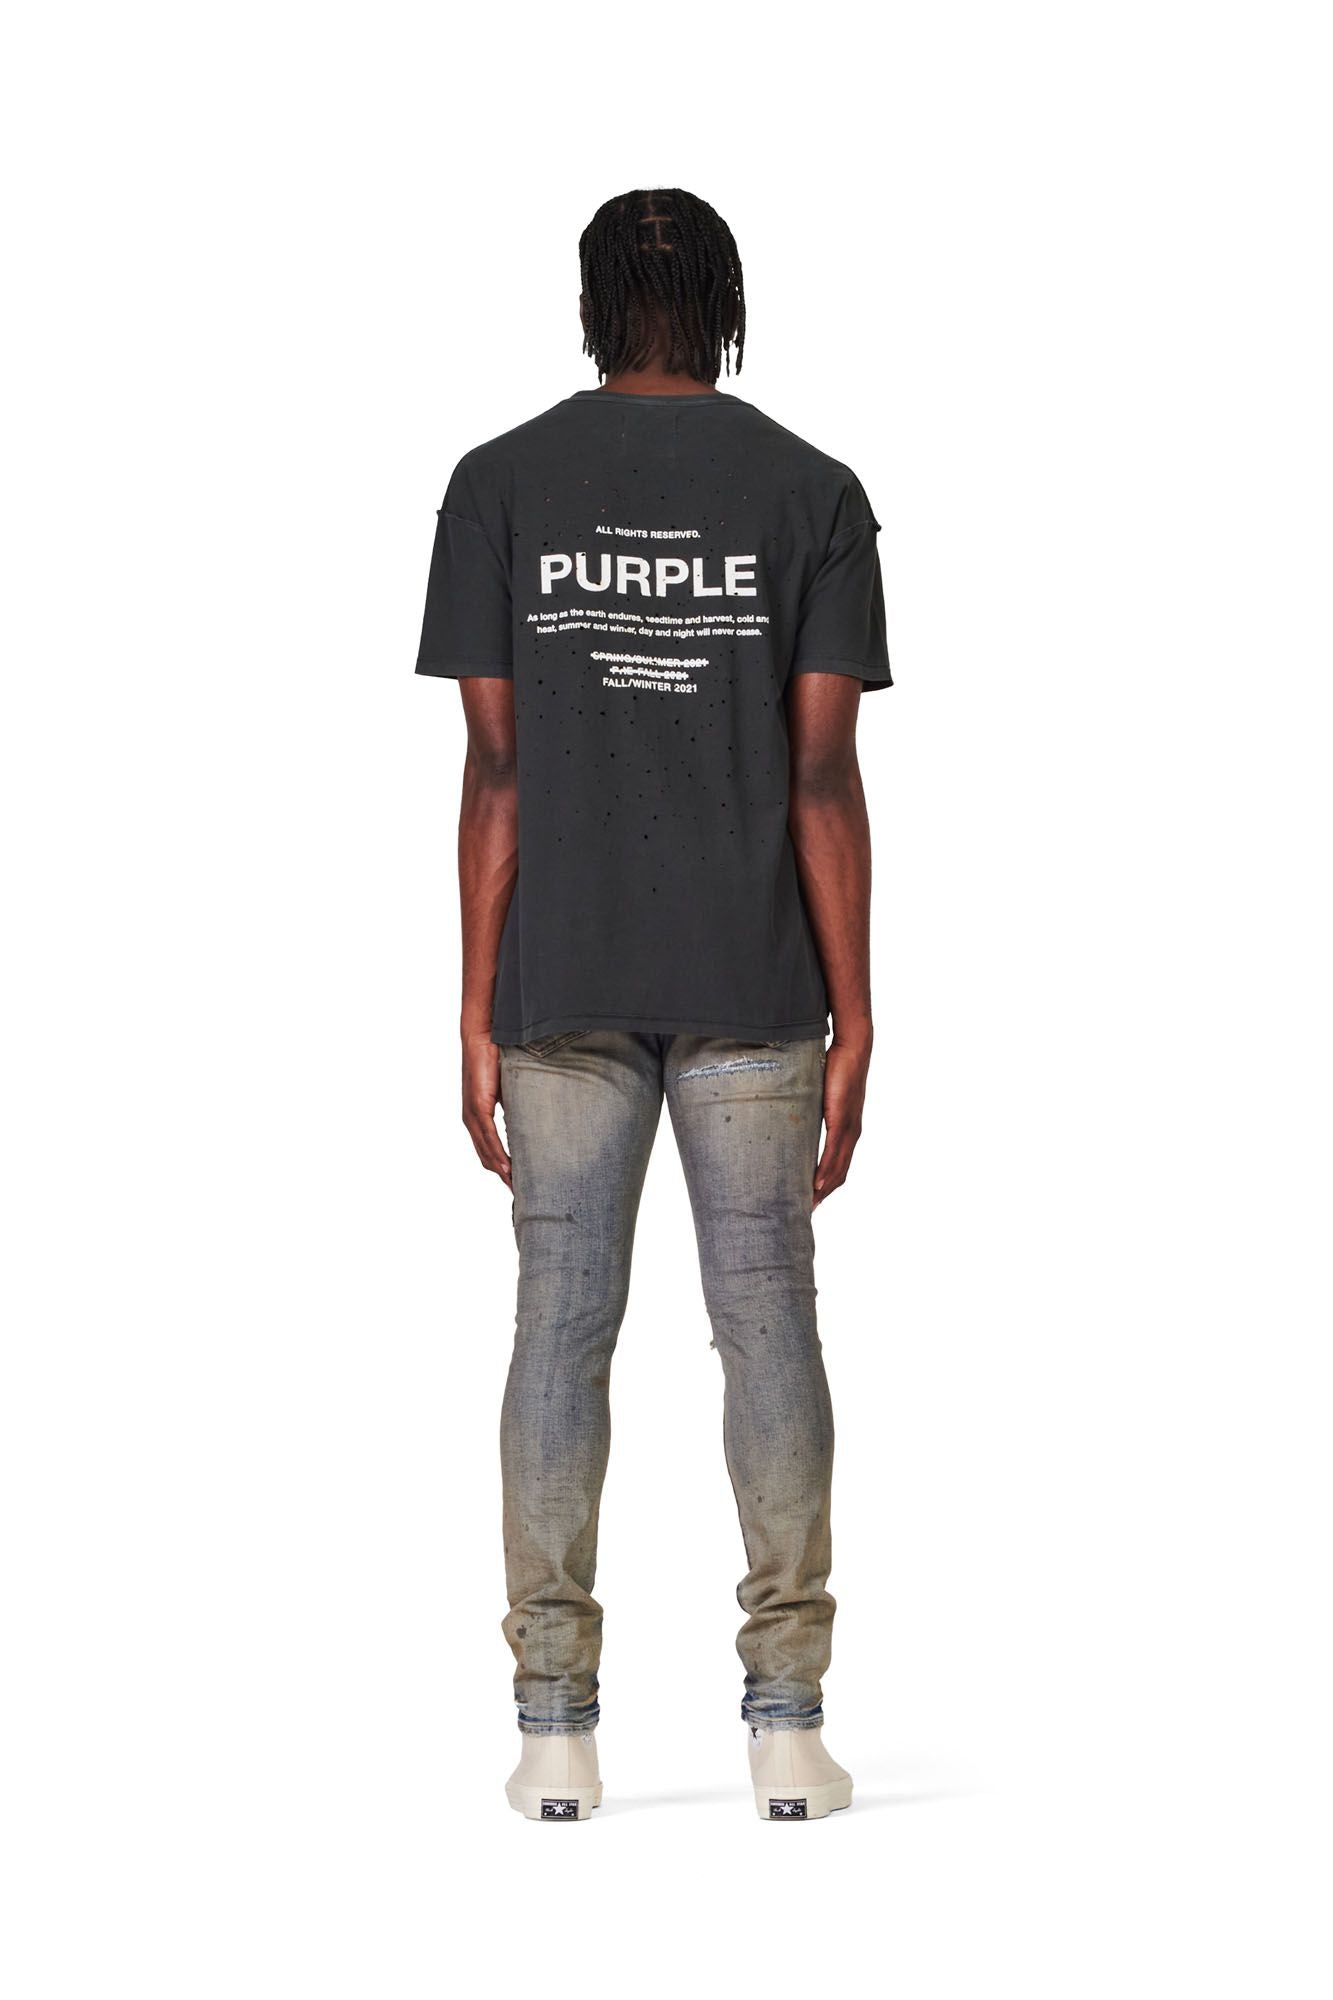 PURPLE BRAND - Men's Denim Jean - Low Rise Skinny - Style No. P001 - Exclusive Indigo Oil Patched - Model Back Pose